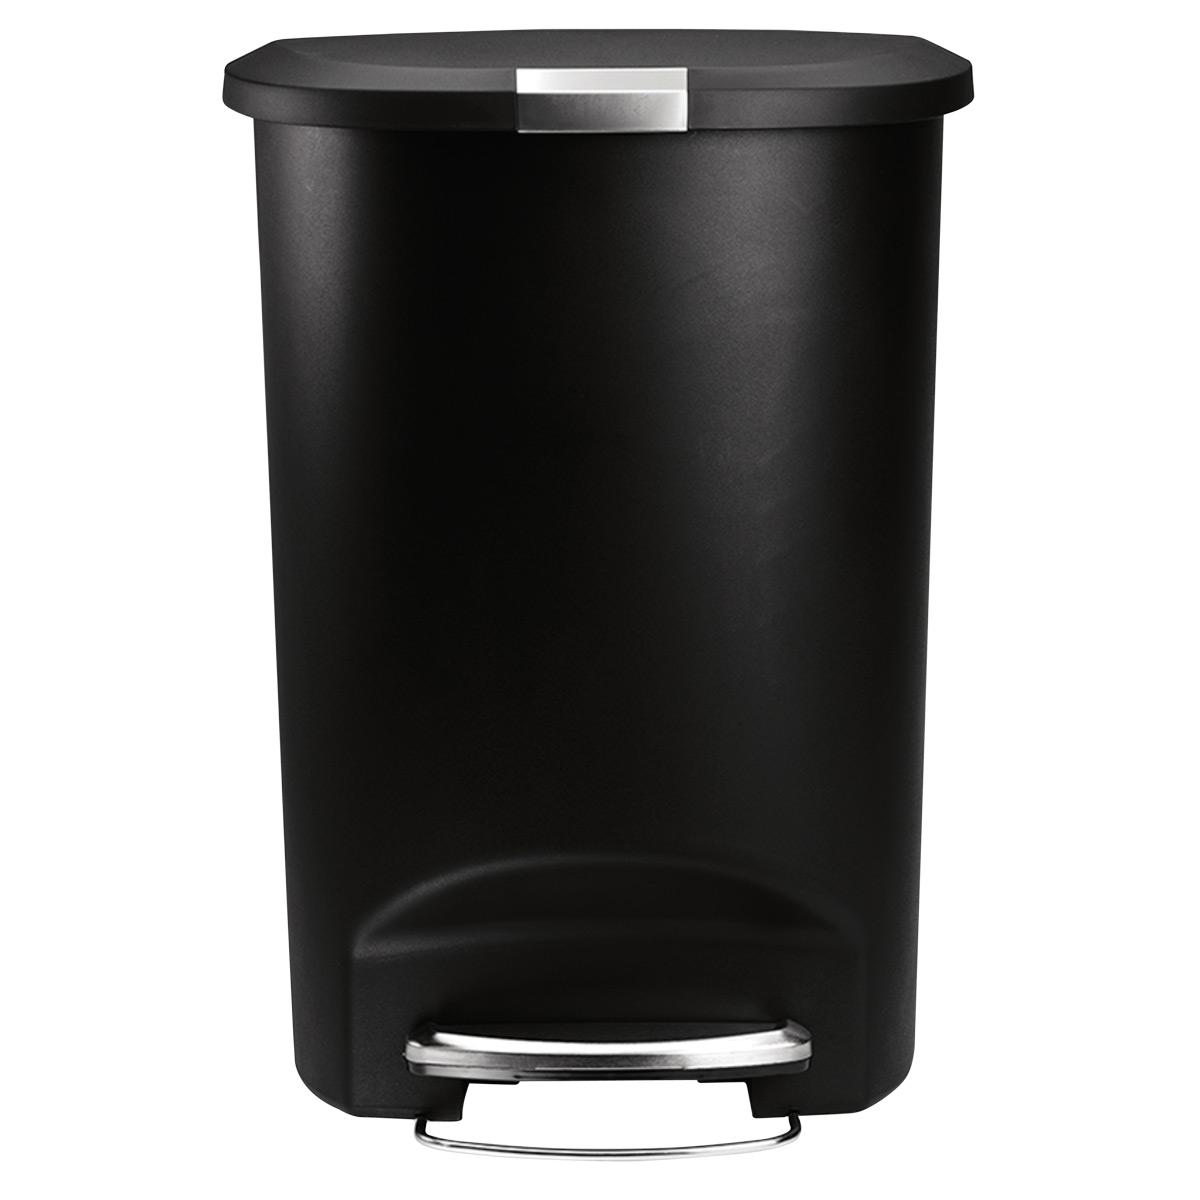 https://www.containerstore.com/catalogimages/378429/10057026-Simplehuman-semi-round-can-.jpg